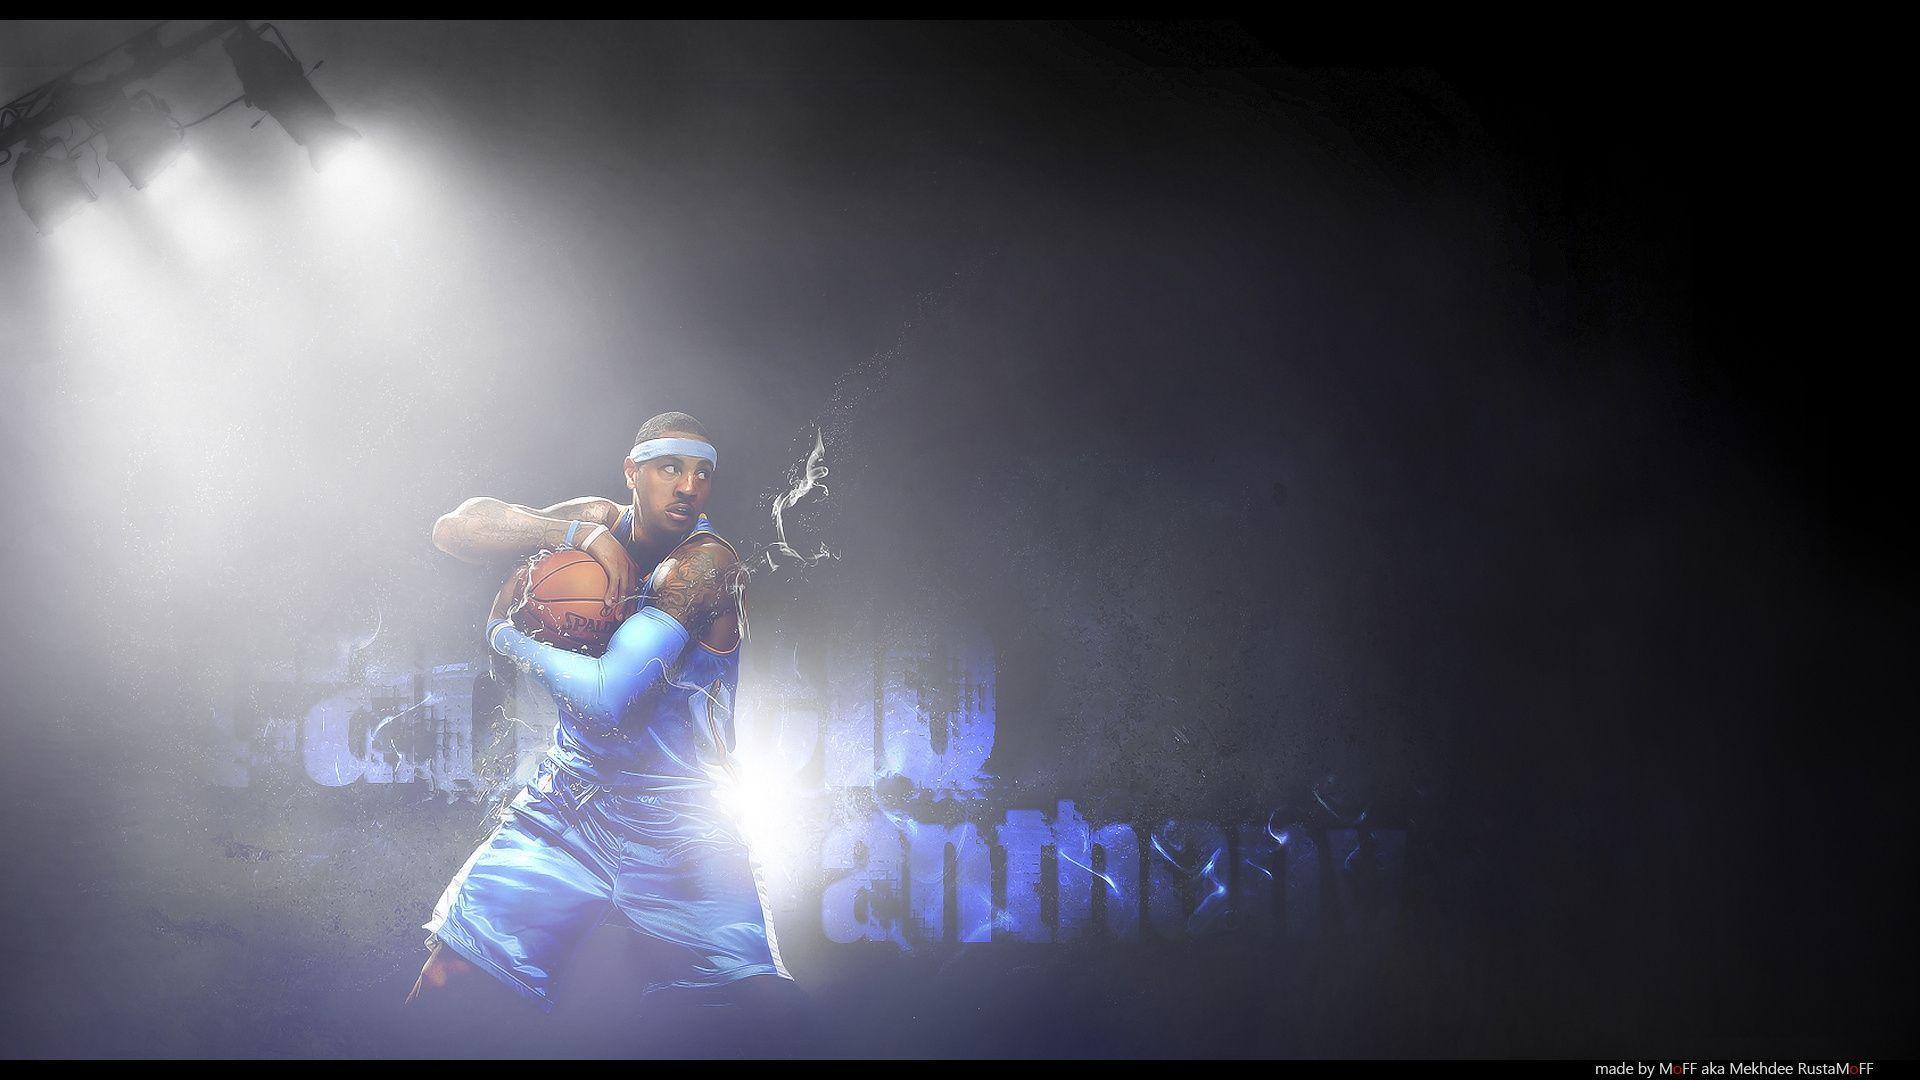 Download Wallpaper 1920x1080 Carmelo anthony, Basketball player